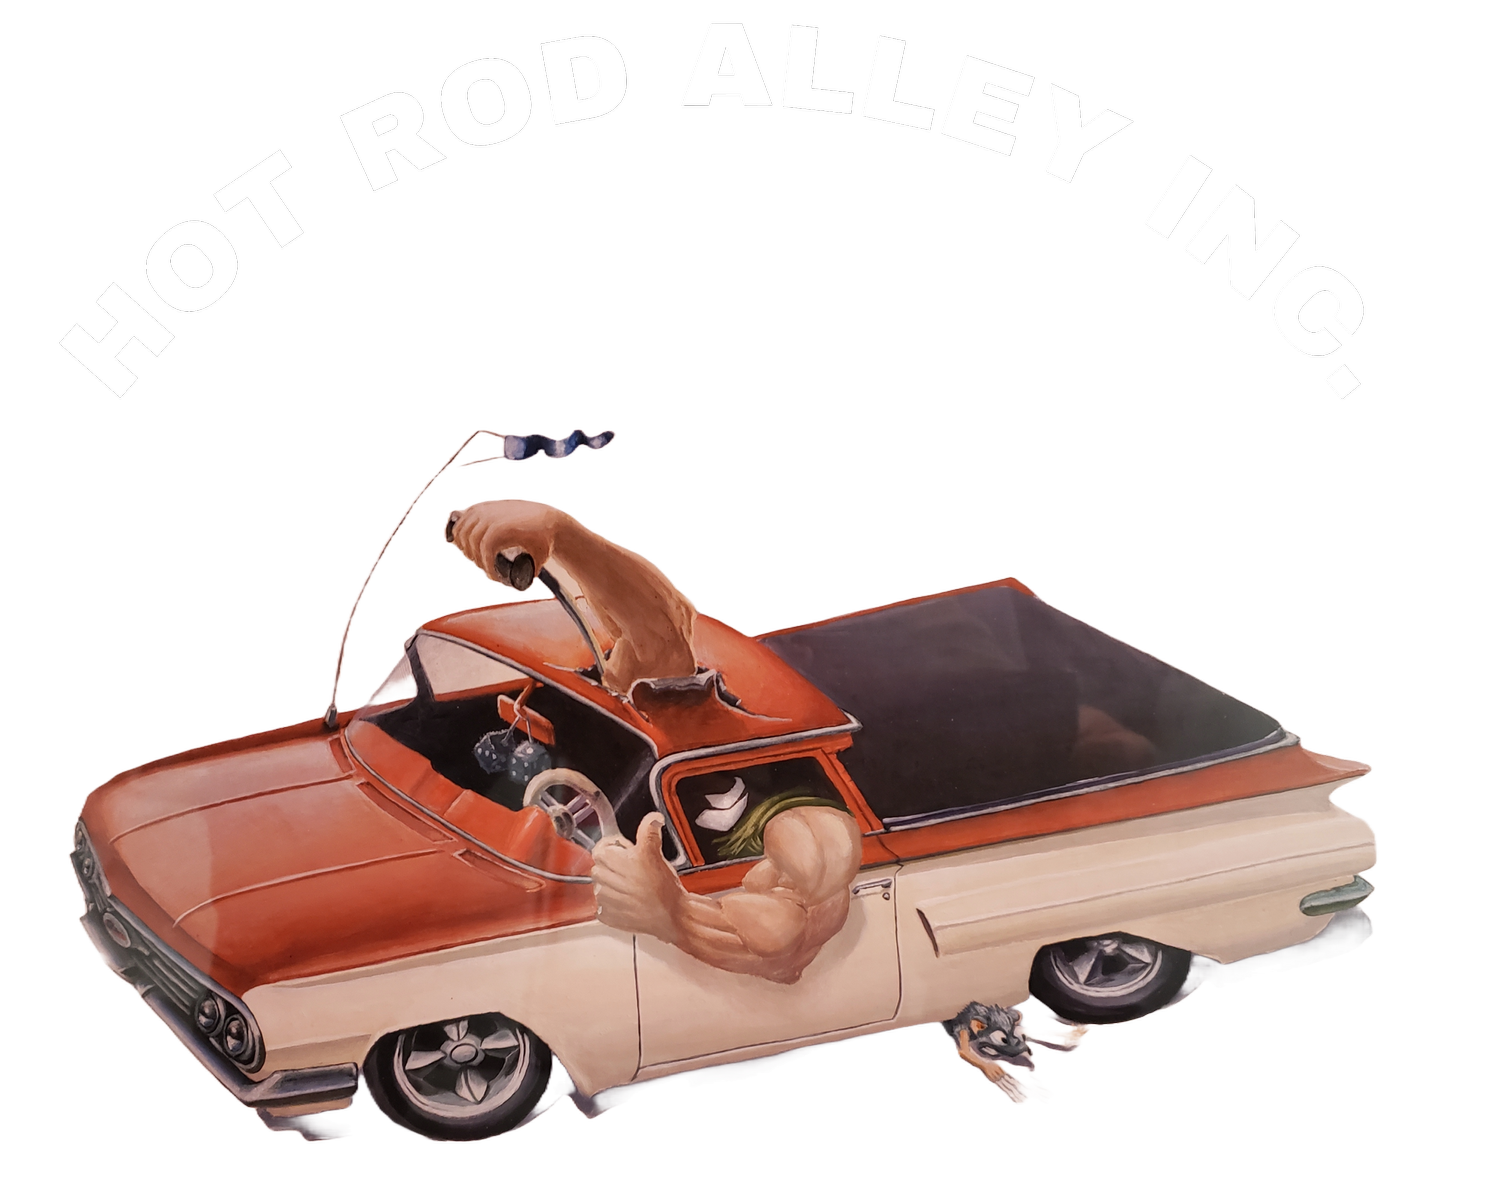 Hot Rod Alley Inc.